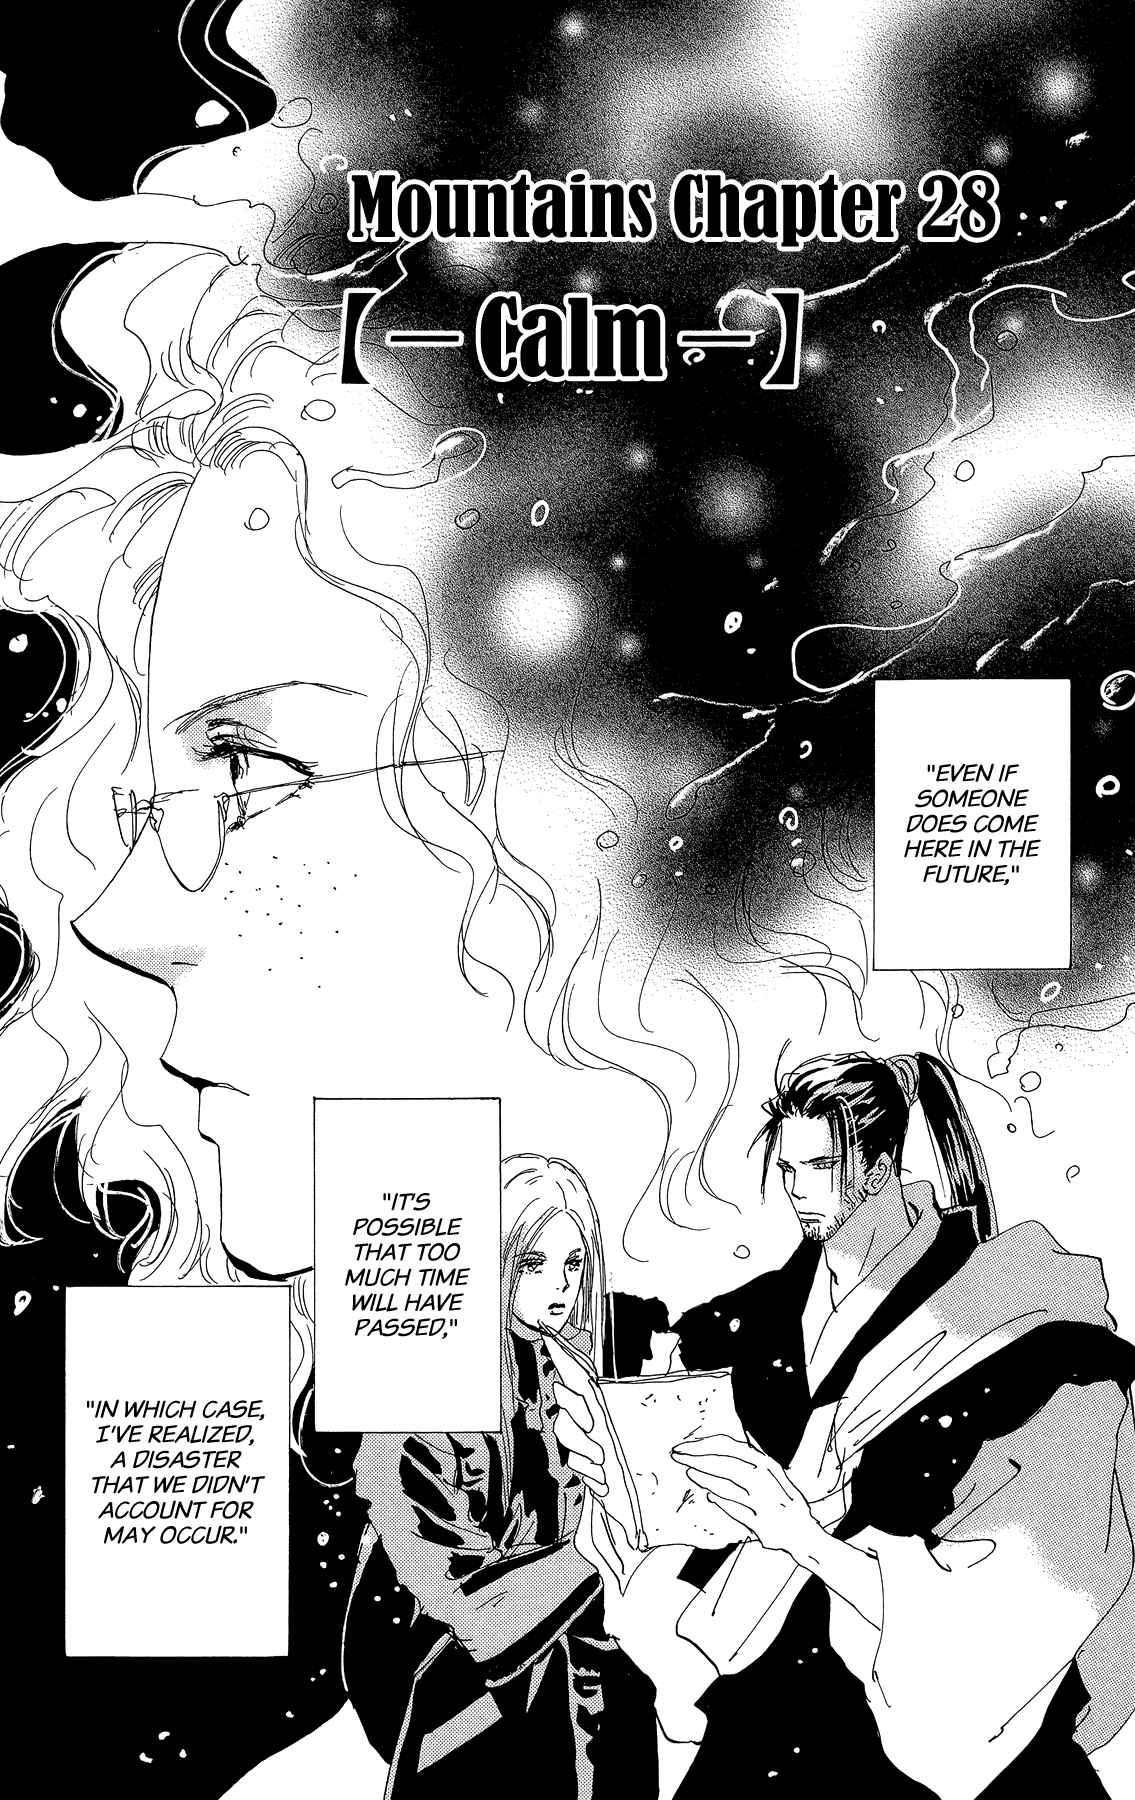 7 Seeds Vol. 32 Ch. 163 Mountains Chapter 28 [Calm]